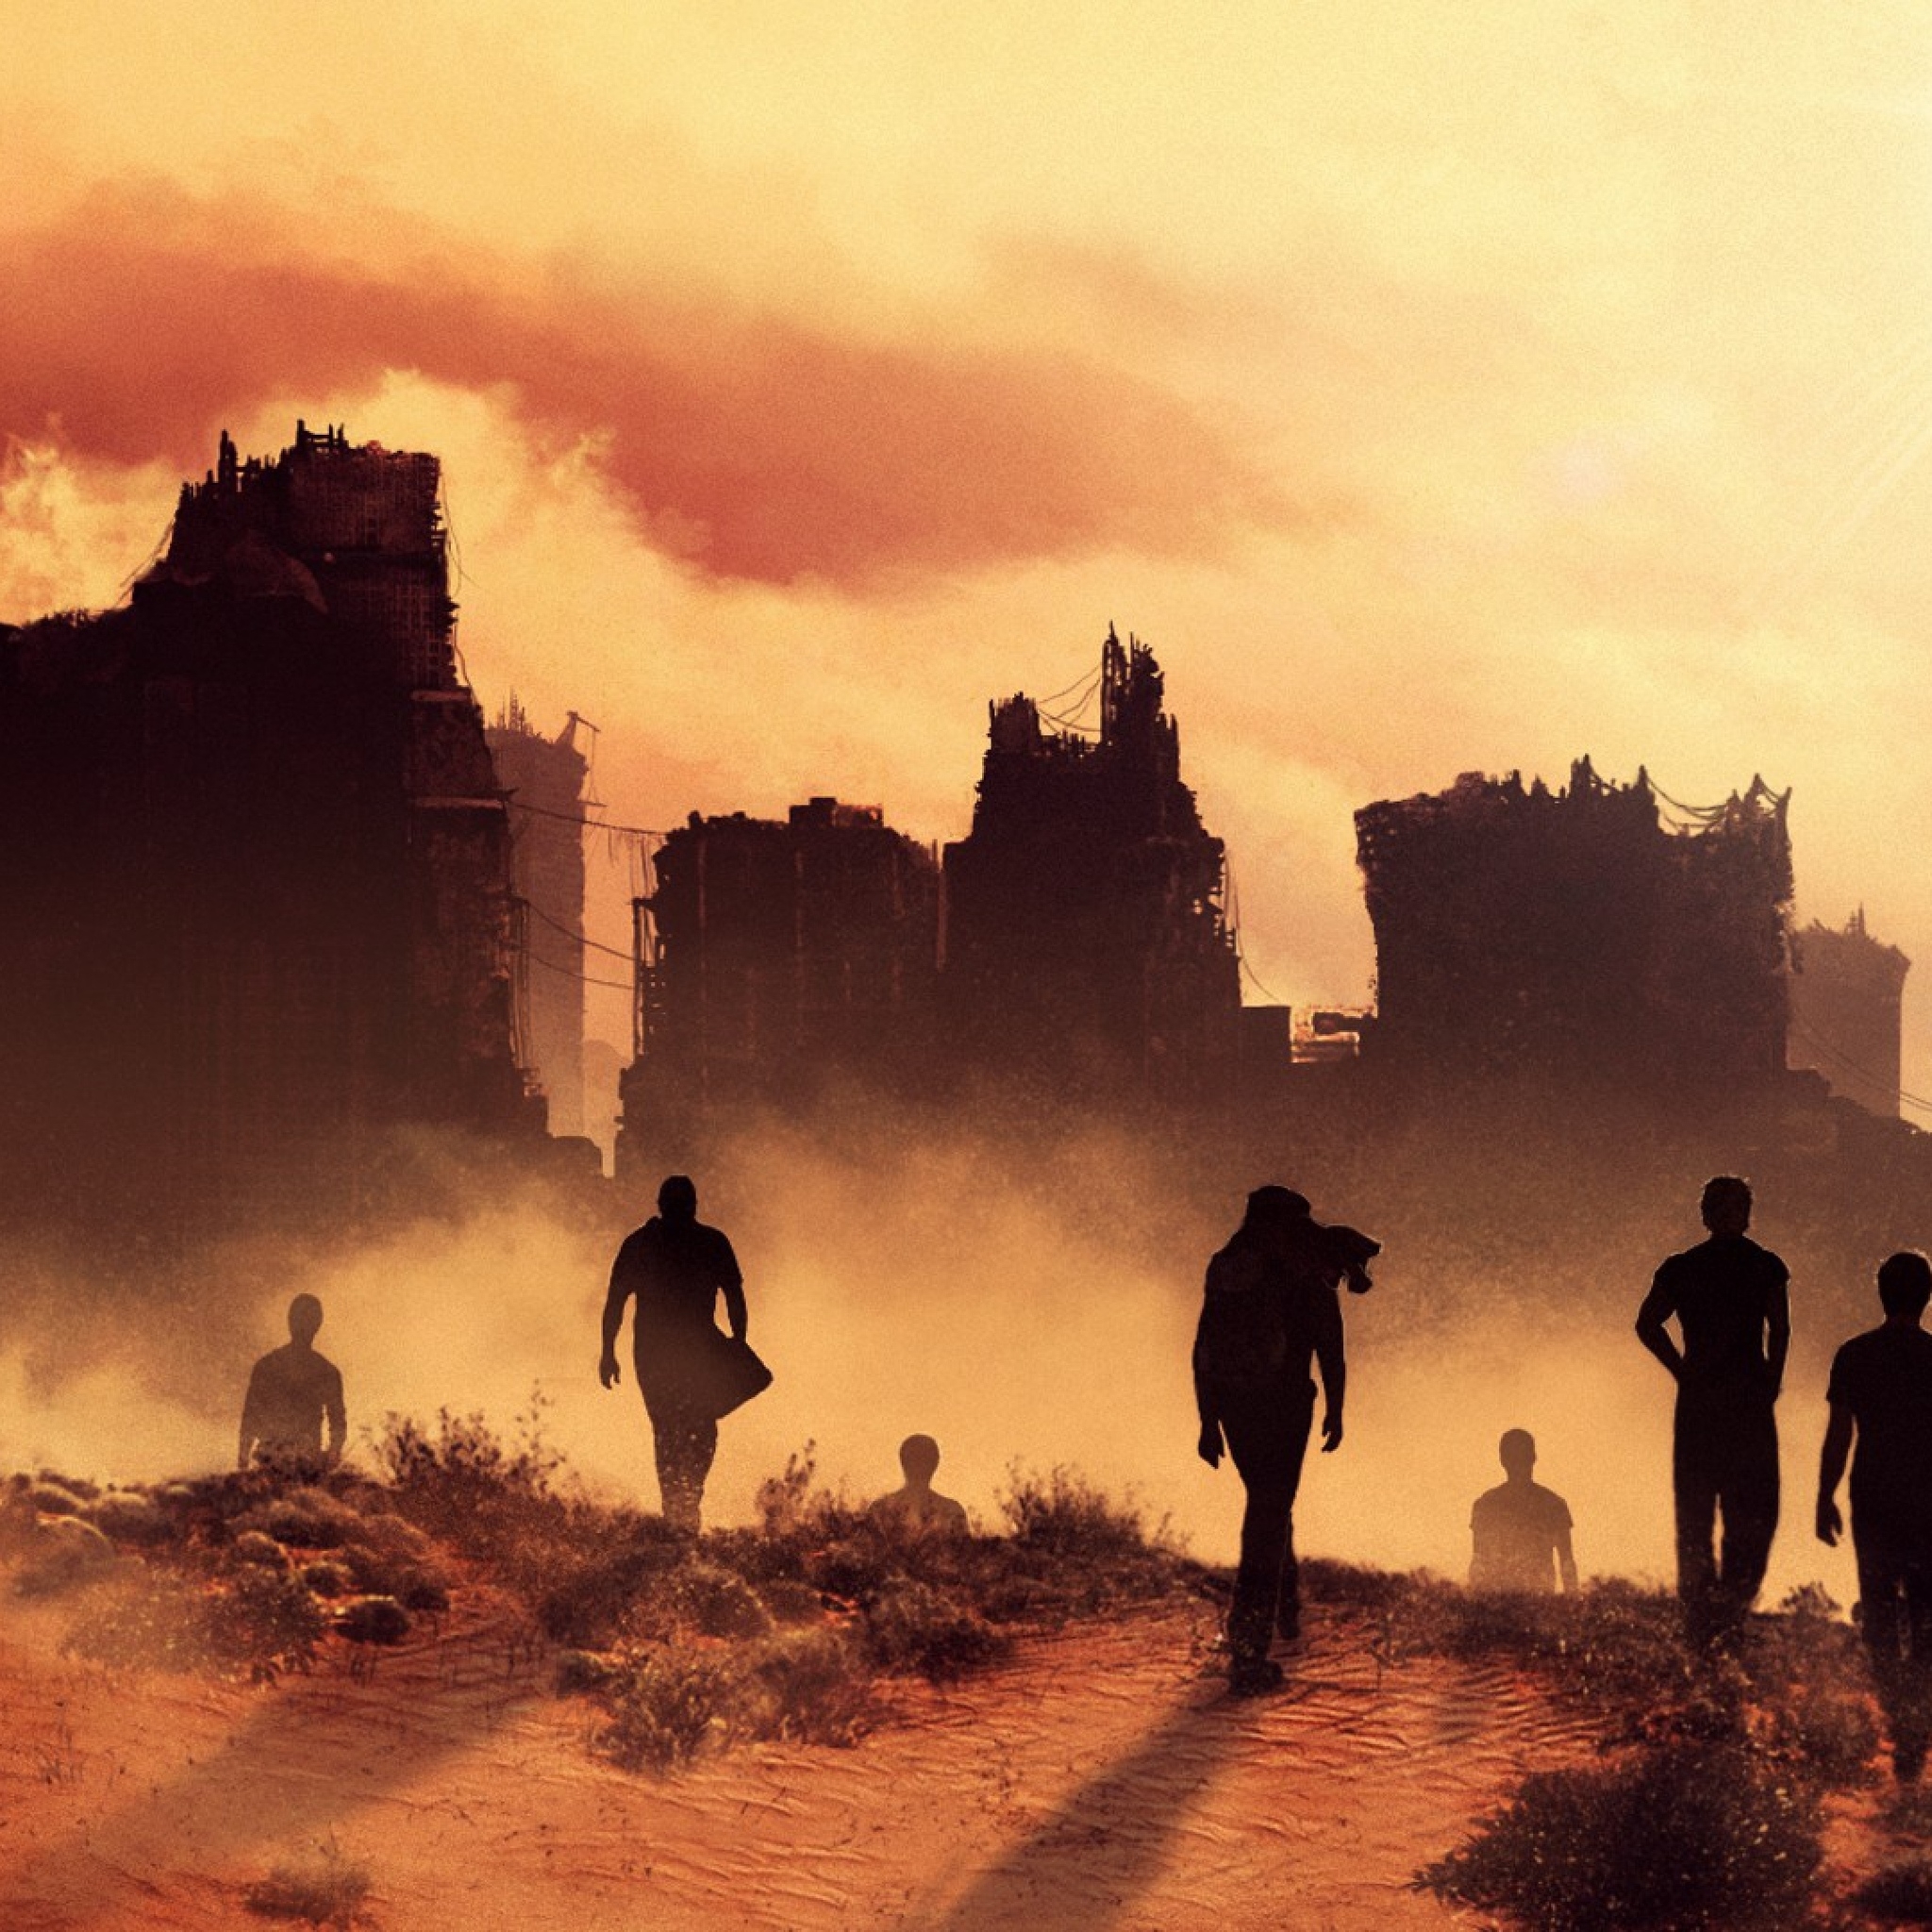 Maze Runner The Scorch Trials Silhouettes for 2048 x 2048 New iPad resolution